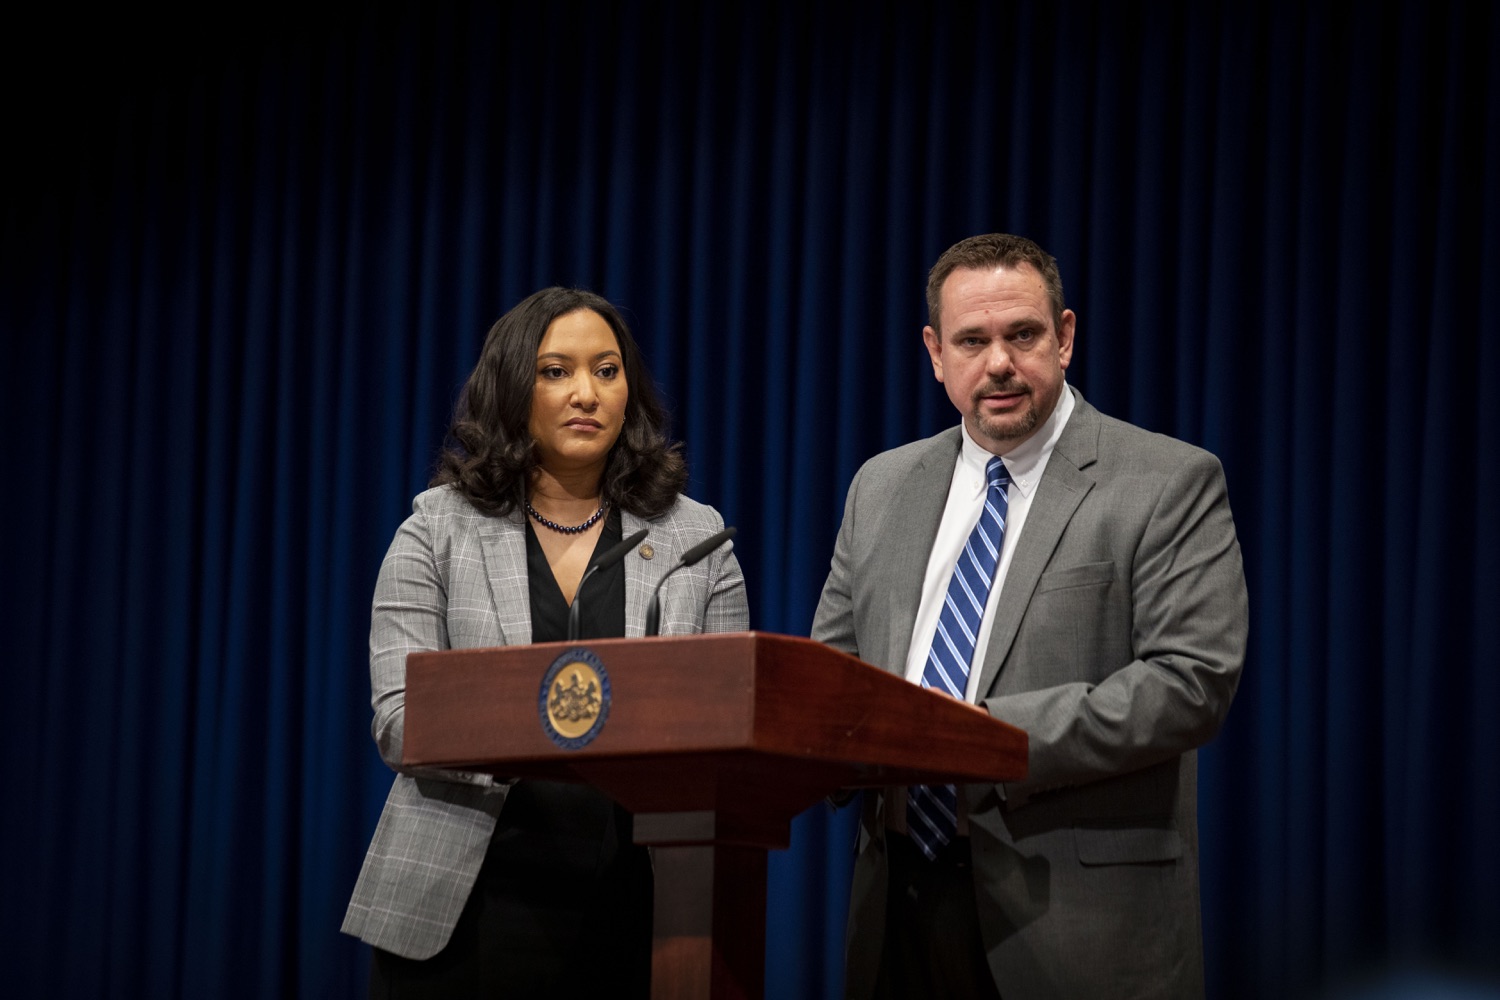 Deputy Secretary for Elections and Commissions Jonathan Marks and Acting Secretary of State Leigh M. Chapman answer questions from the media about the statewide recount of the U.S. Senate race, in Harrisburg, PA on May 25, 2022.<br><a href="https://filesource.amperwave.net/commonwealthofpa/photo/20885_dos_recount_07.jpg" target="_blank">⇣ Download Photo</a>